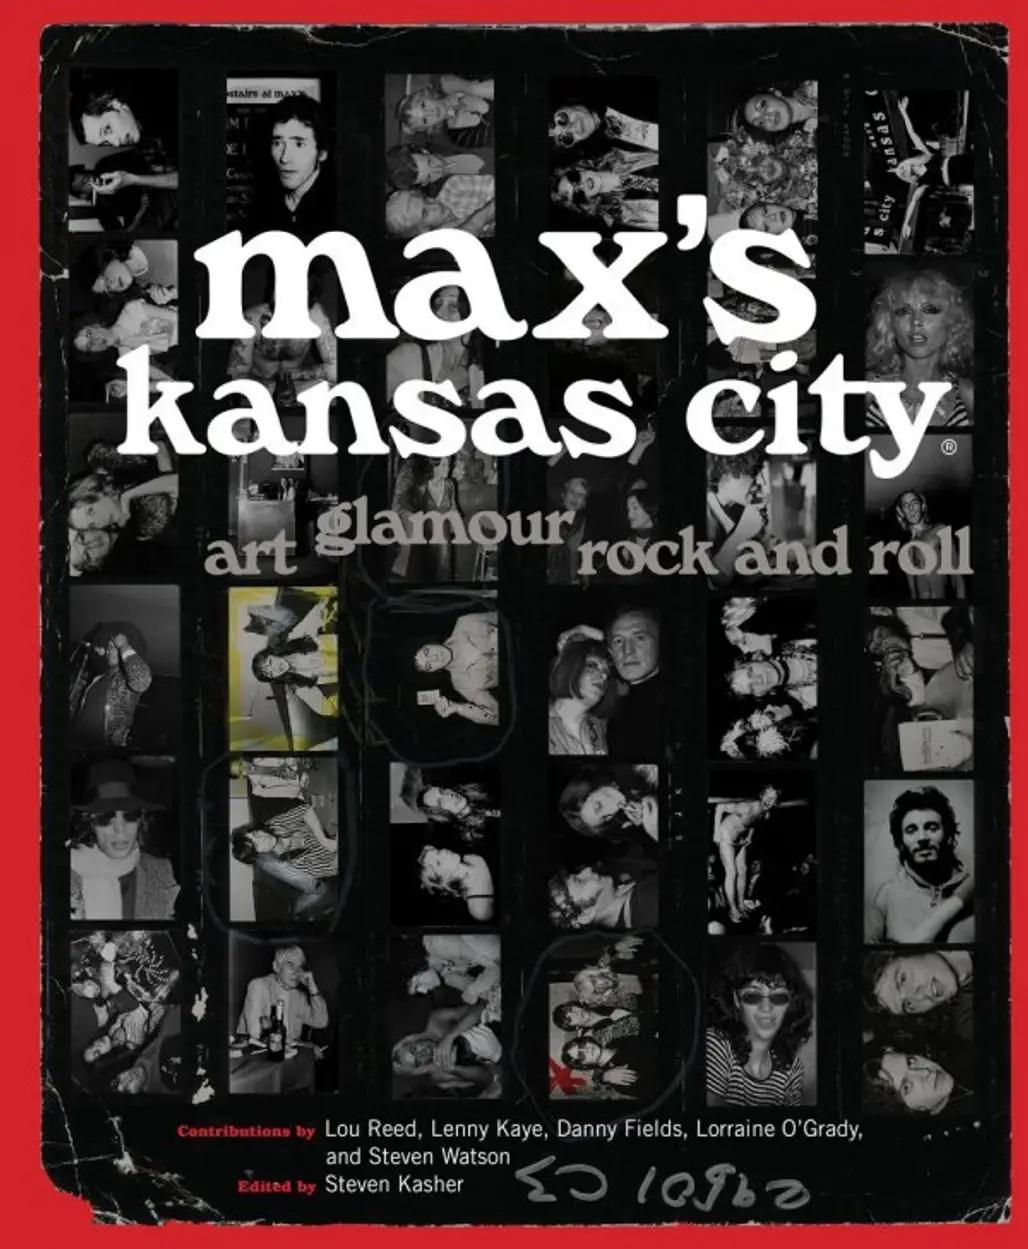 Max’s Kansas City: Art, Glamour, Rock and Roll by Steven Kasher